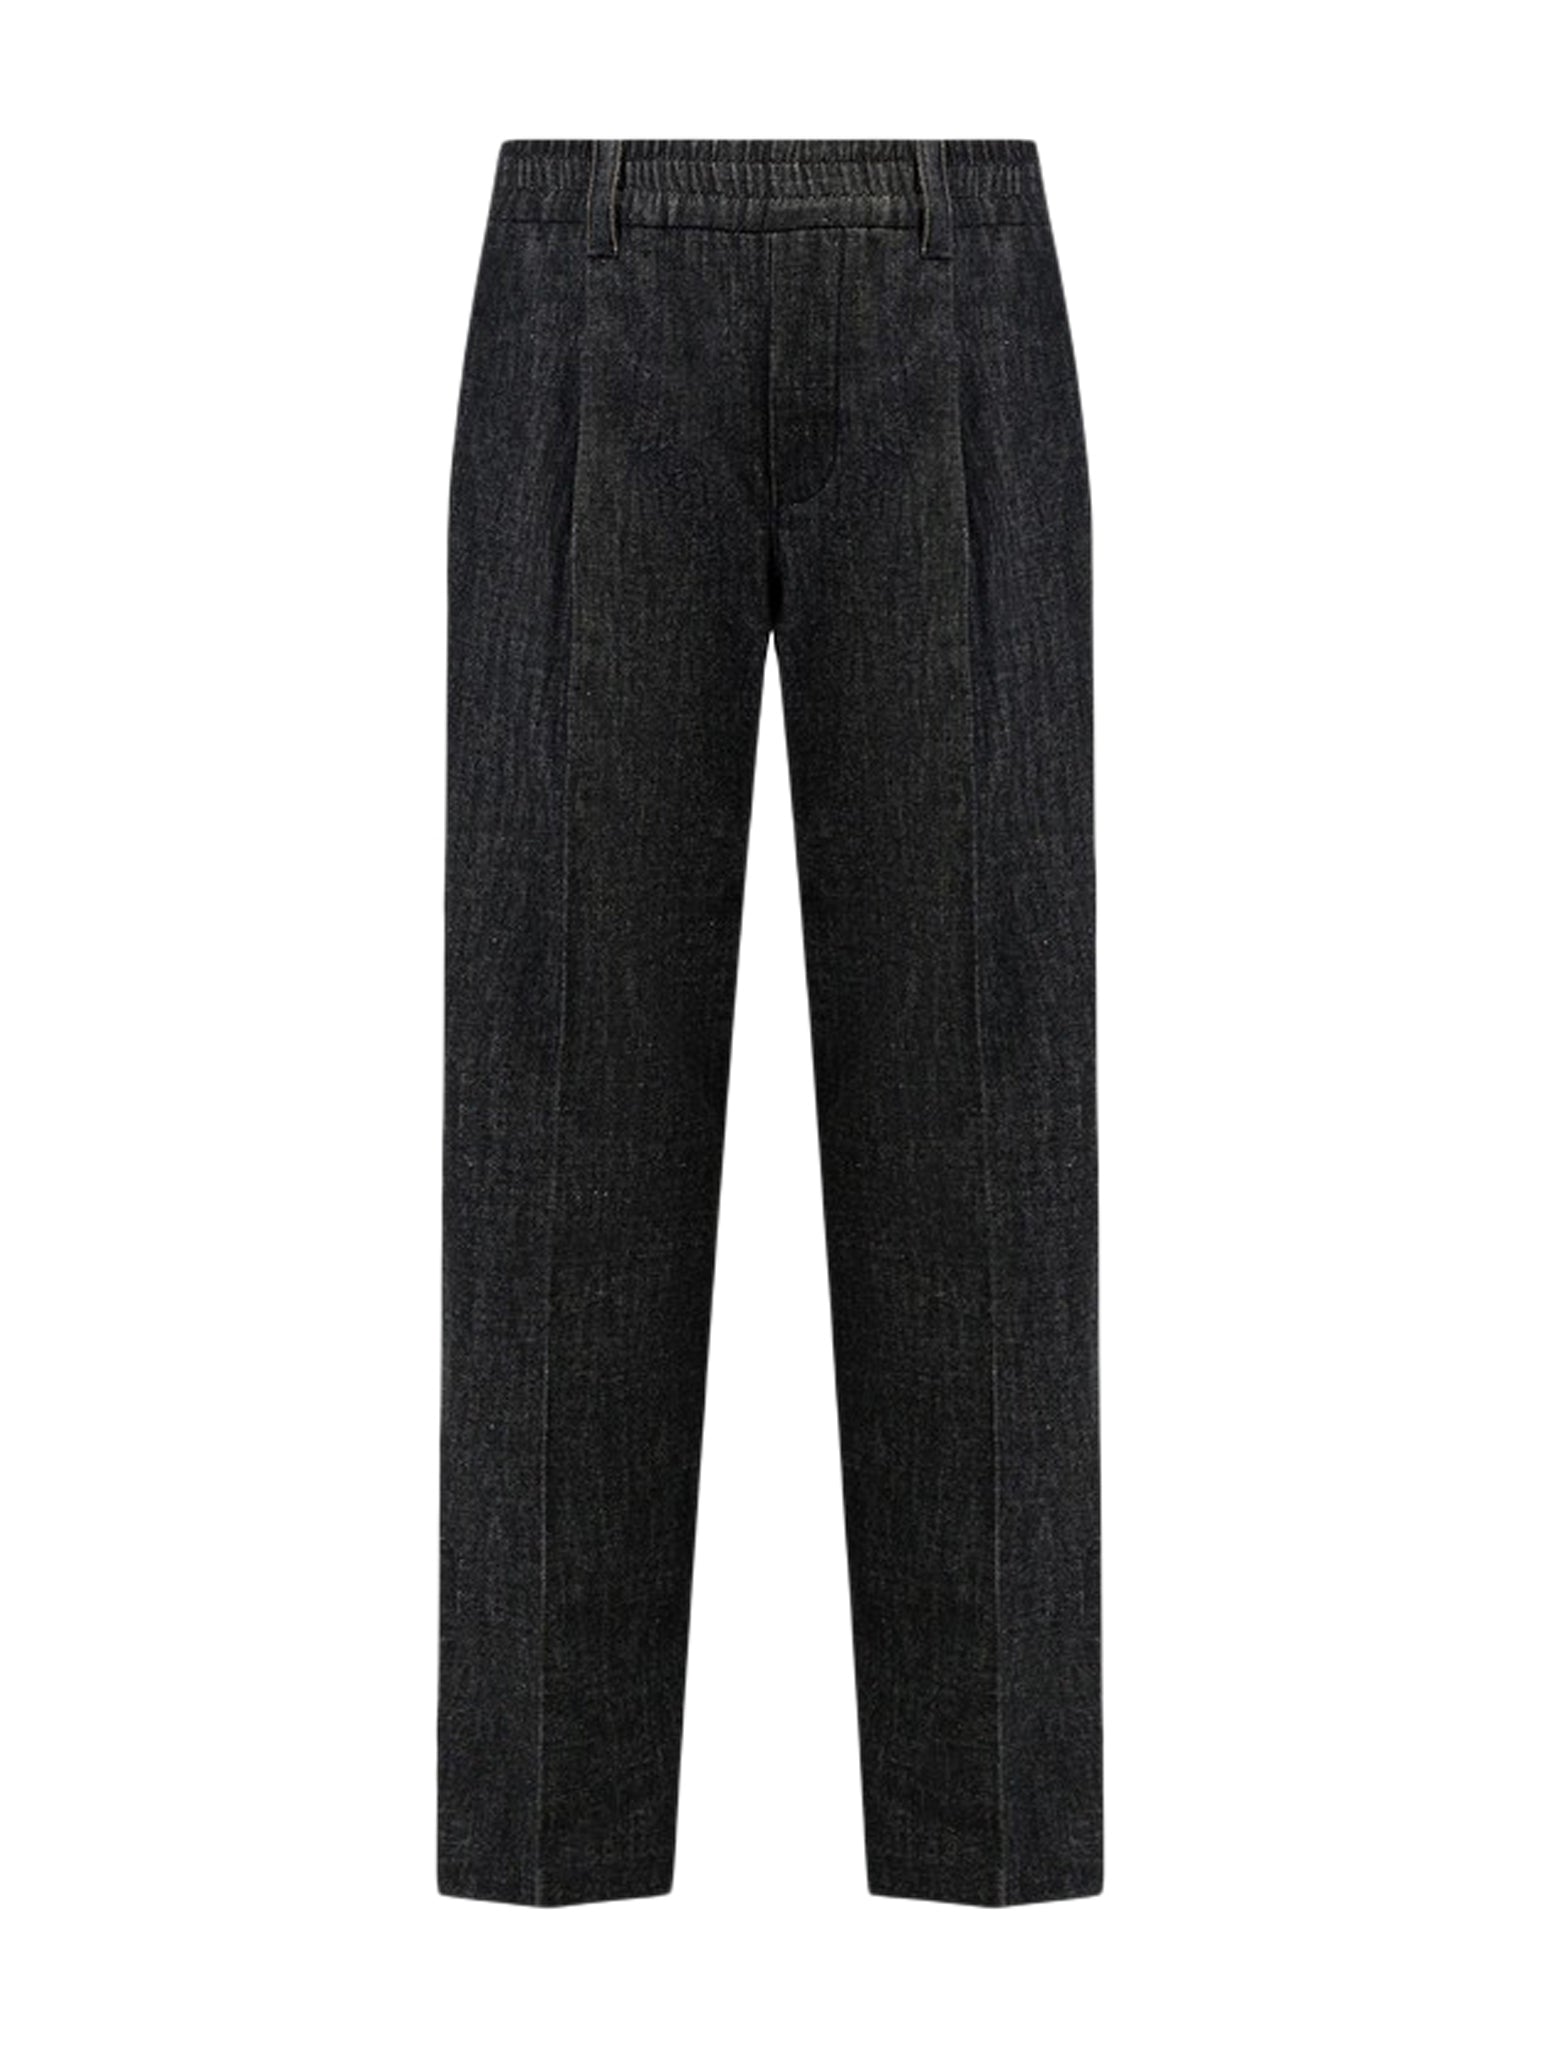 Baggy trousers in Dark Polished denim with Shiny Loop Details